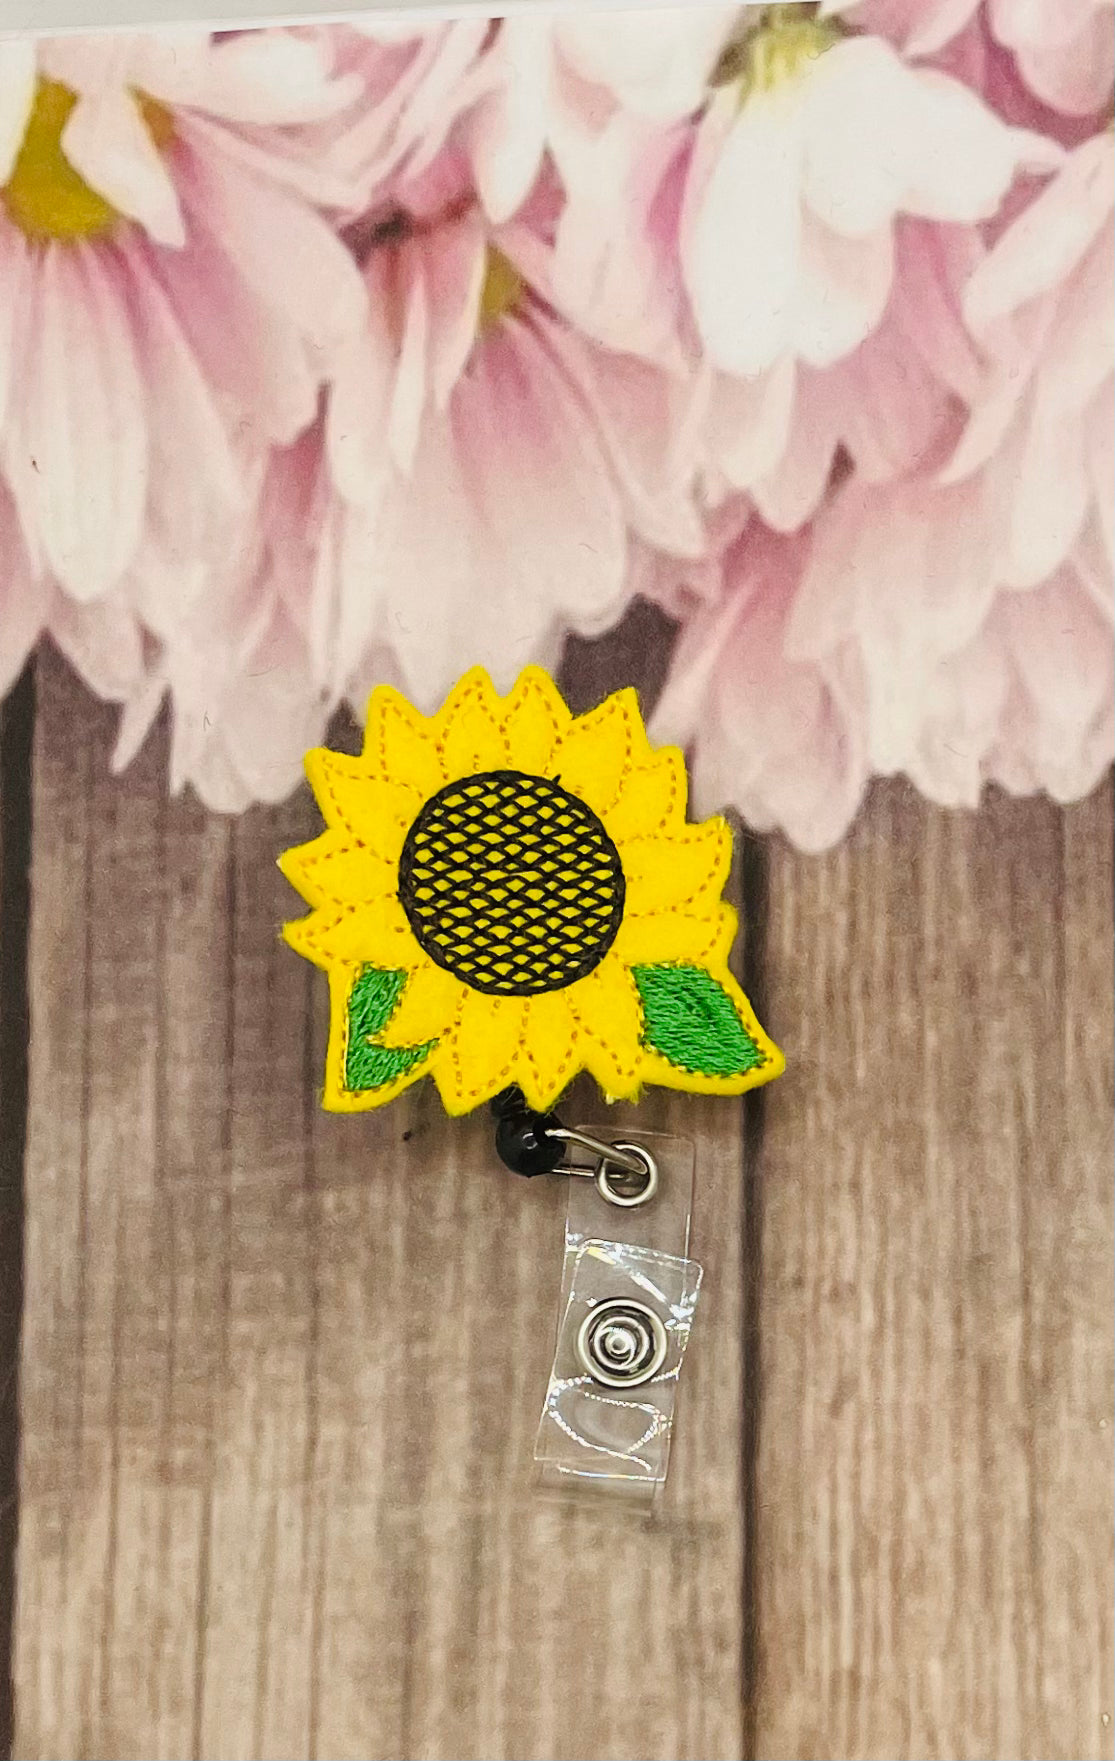 Smiling sunflower badge holder with retractable reel